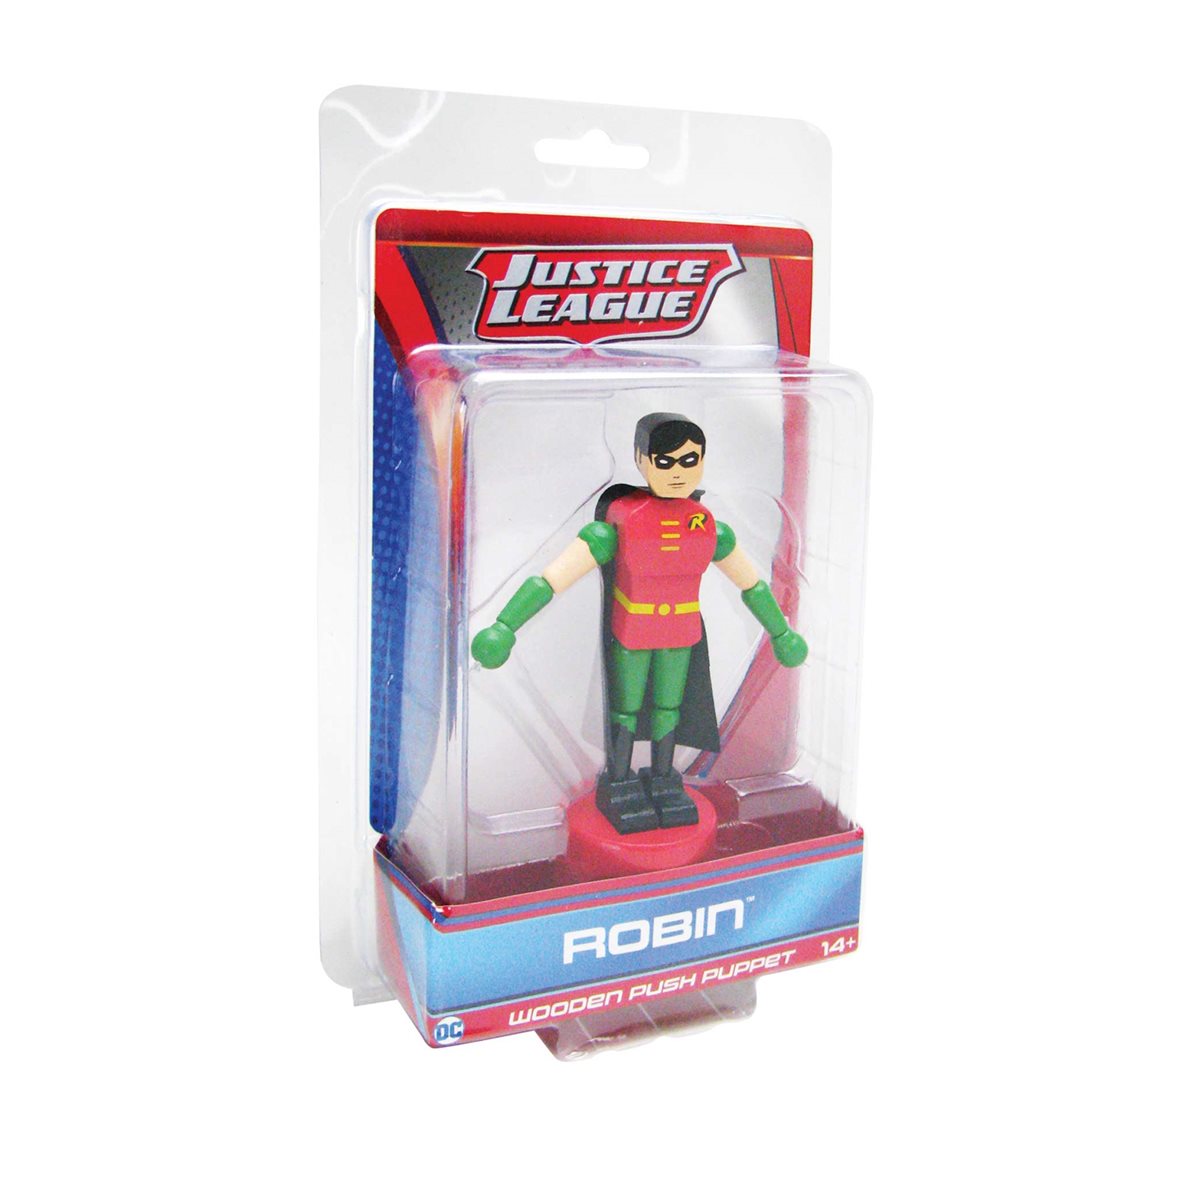 Justice League Robin Wooden Push Puppet DC Comics entertainment Earth WB NEW 